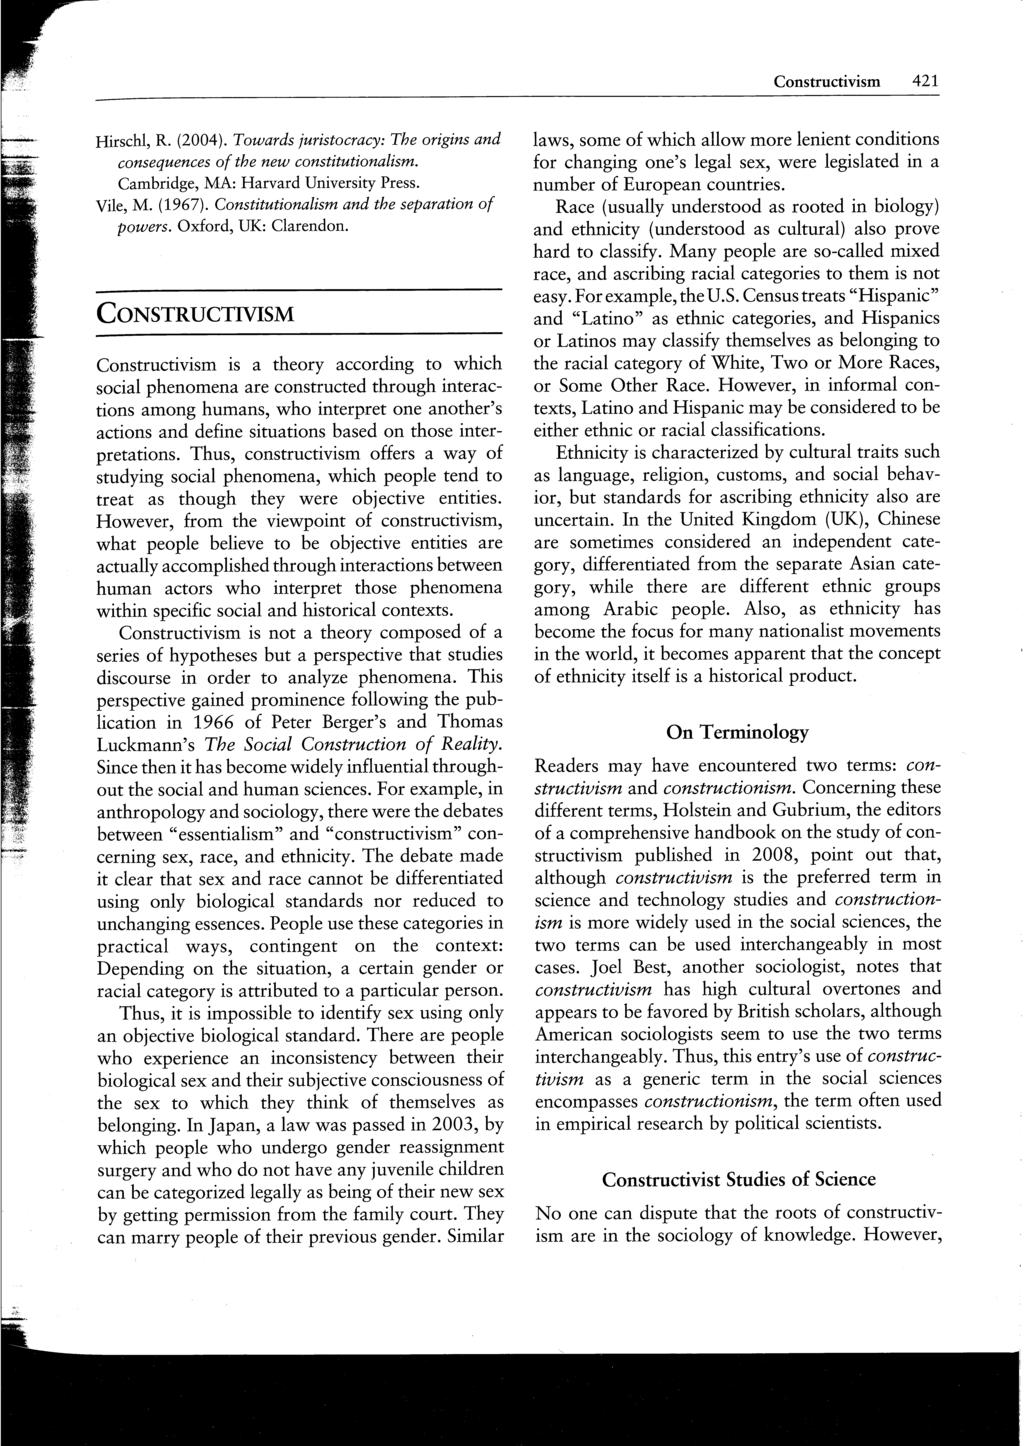 Constructivism 421 Hirschl, R. (2004). Towards juristocracy: The origins and consequences of the new constitutionalism. Cambridge, MA: Harvard University Press. Vile, M. (1967).